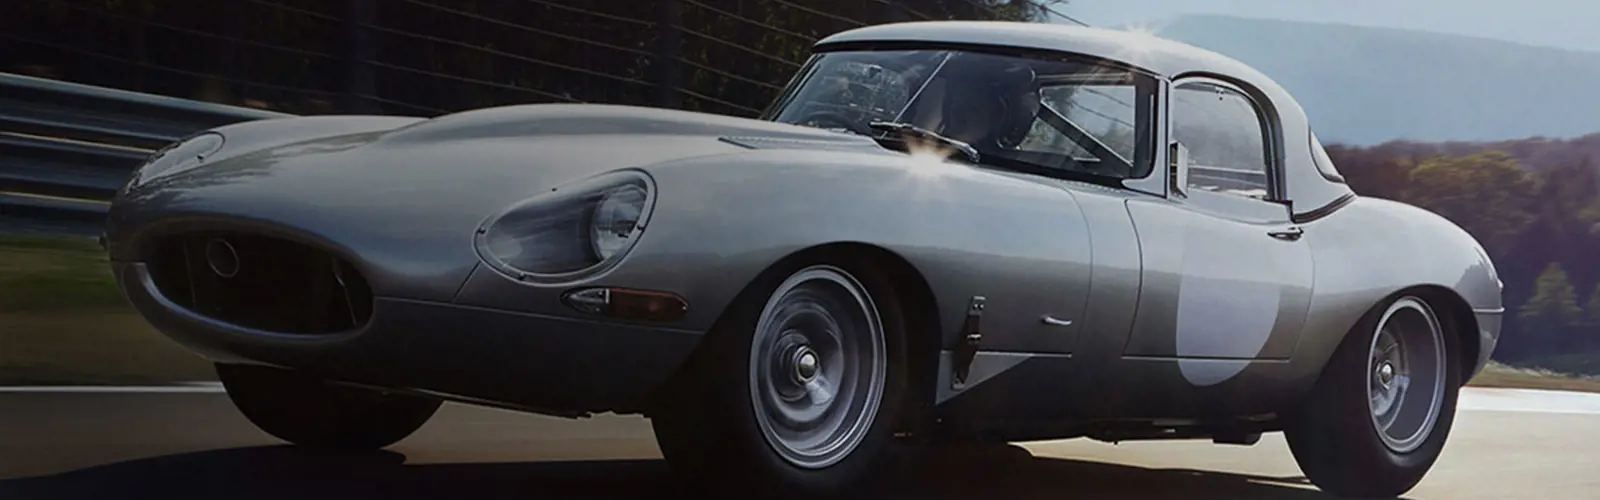 Jaguar Heritage: Years Of Exceptional Performance